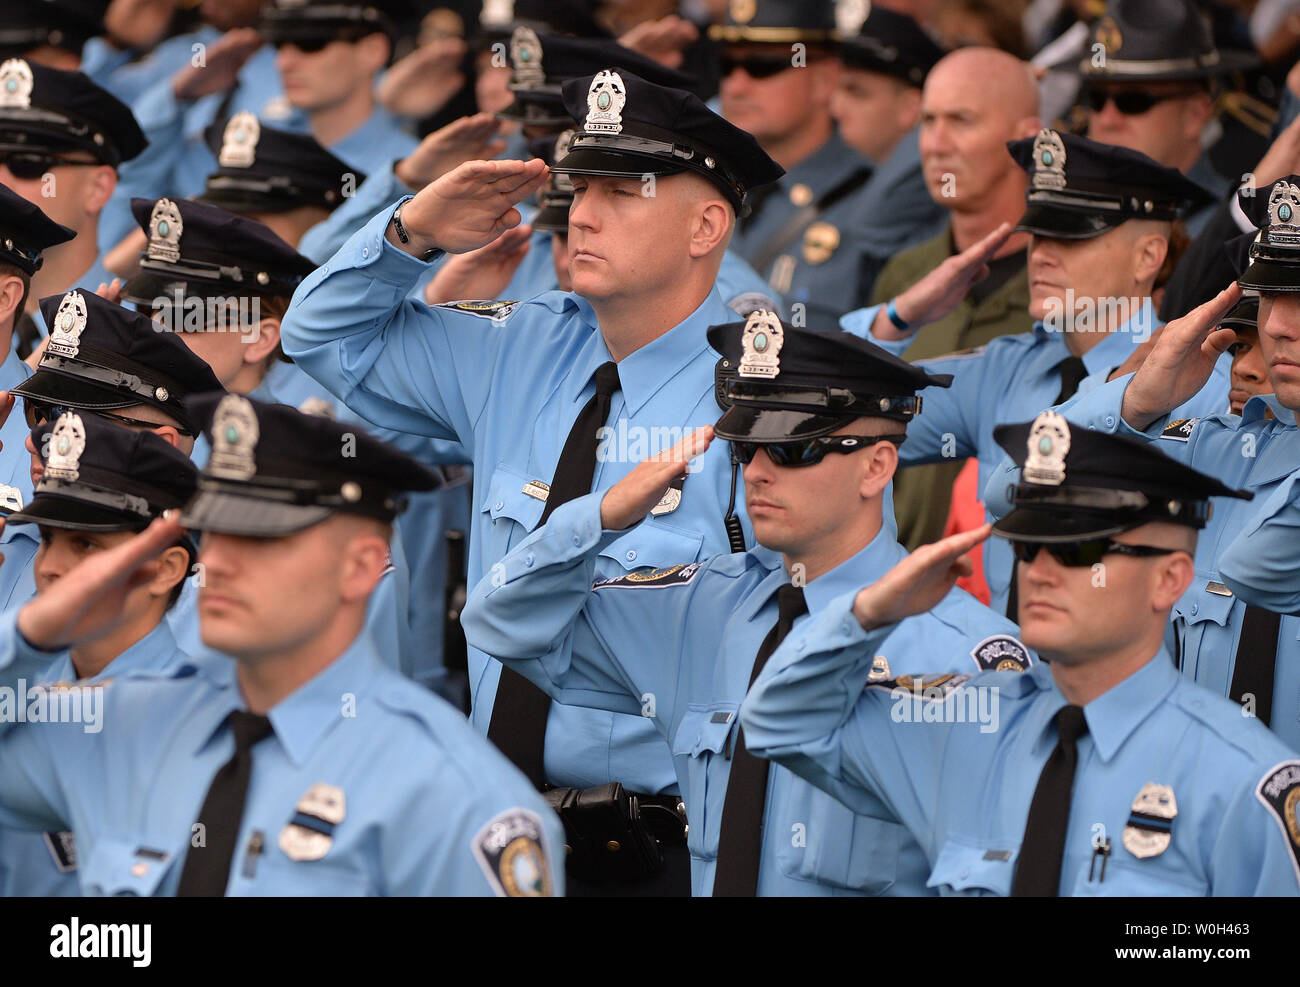 Law enforcement personnel salute during the National Anthem during the National Peace Officers' Memorial Service on the West Front of the Capitol Building on May 15, 2013 in Washington, D.C.  UPI/Kevin Dietsch Stock Photo